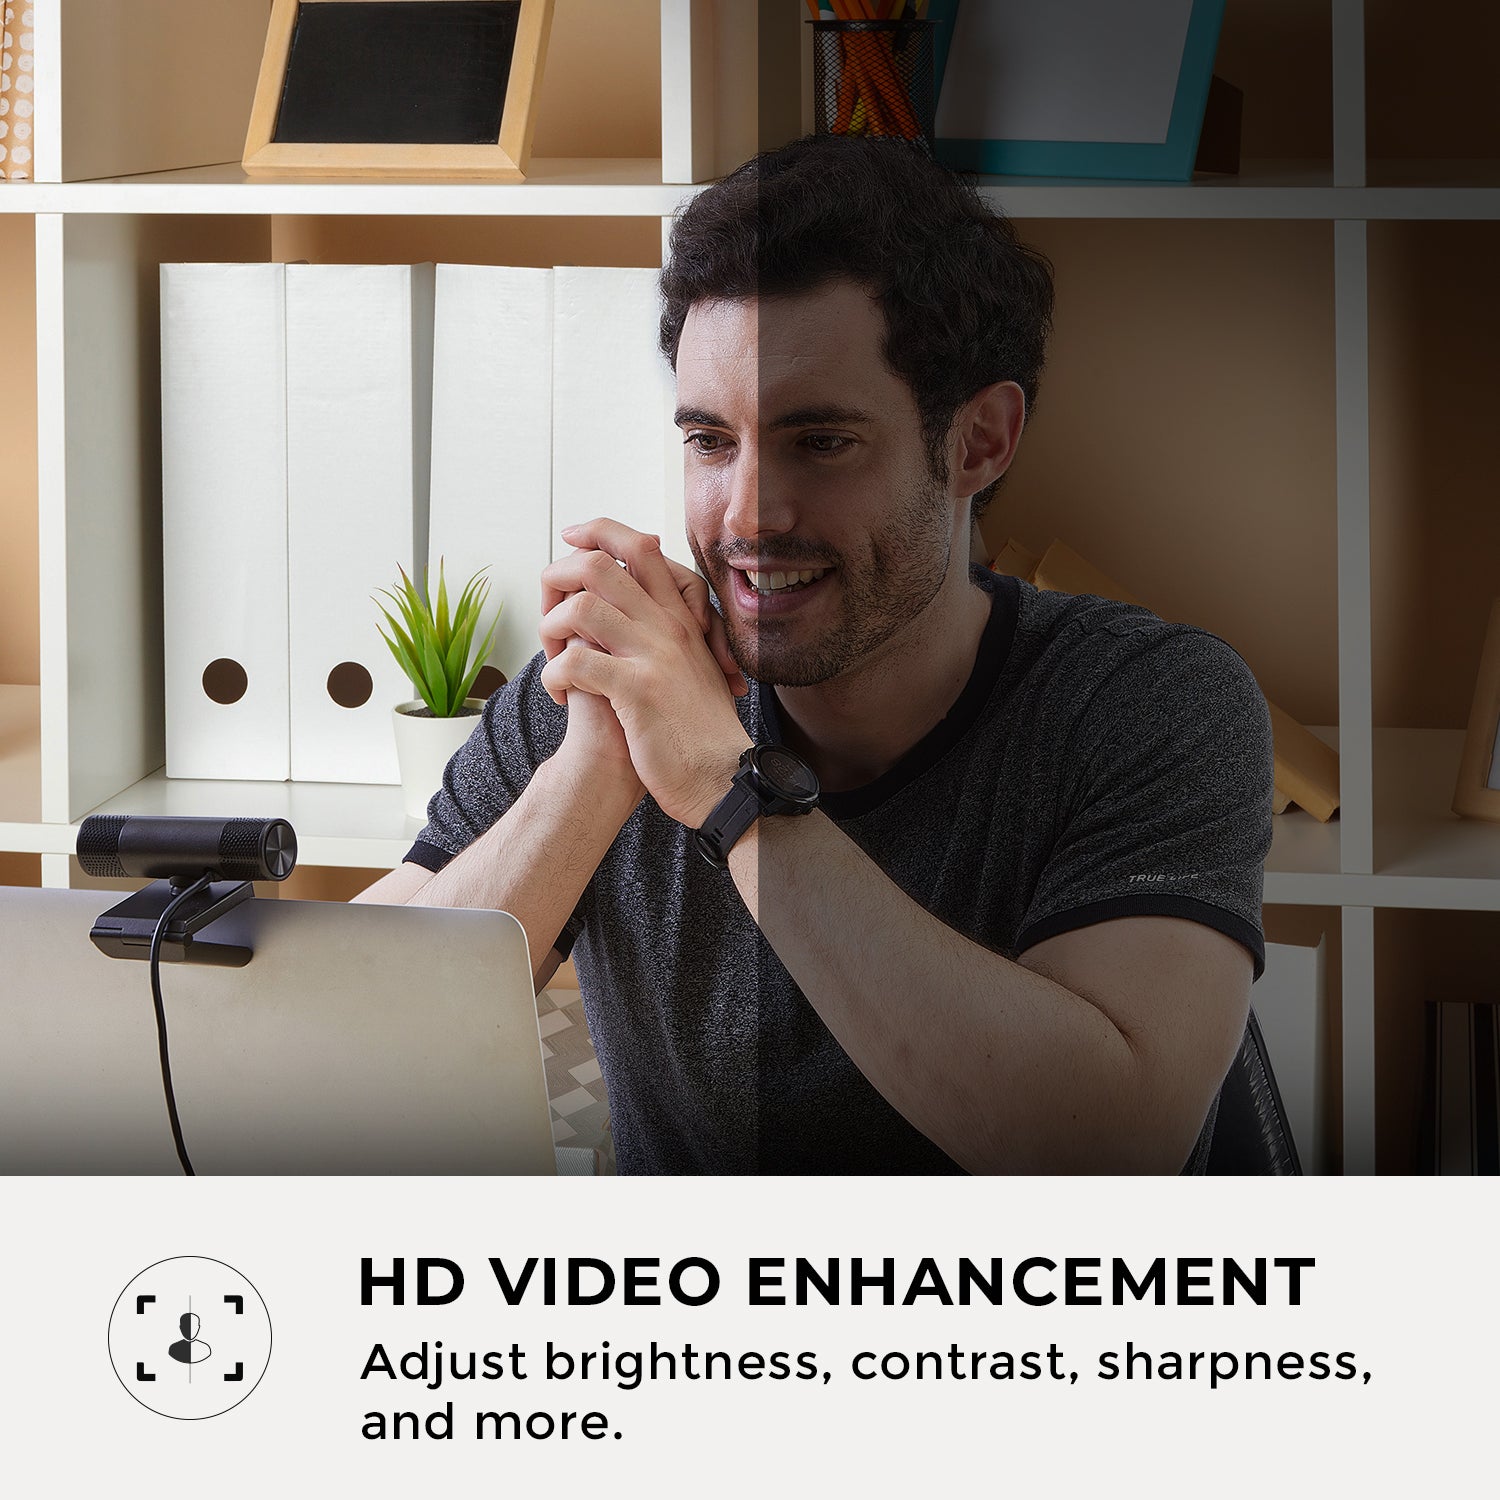 Person with HD video enhancement shows a correctly exposed subject